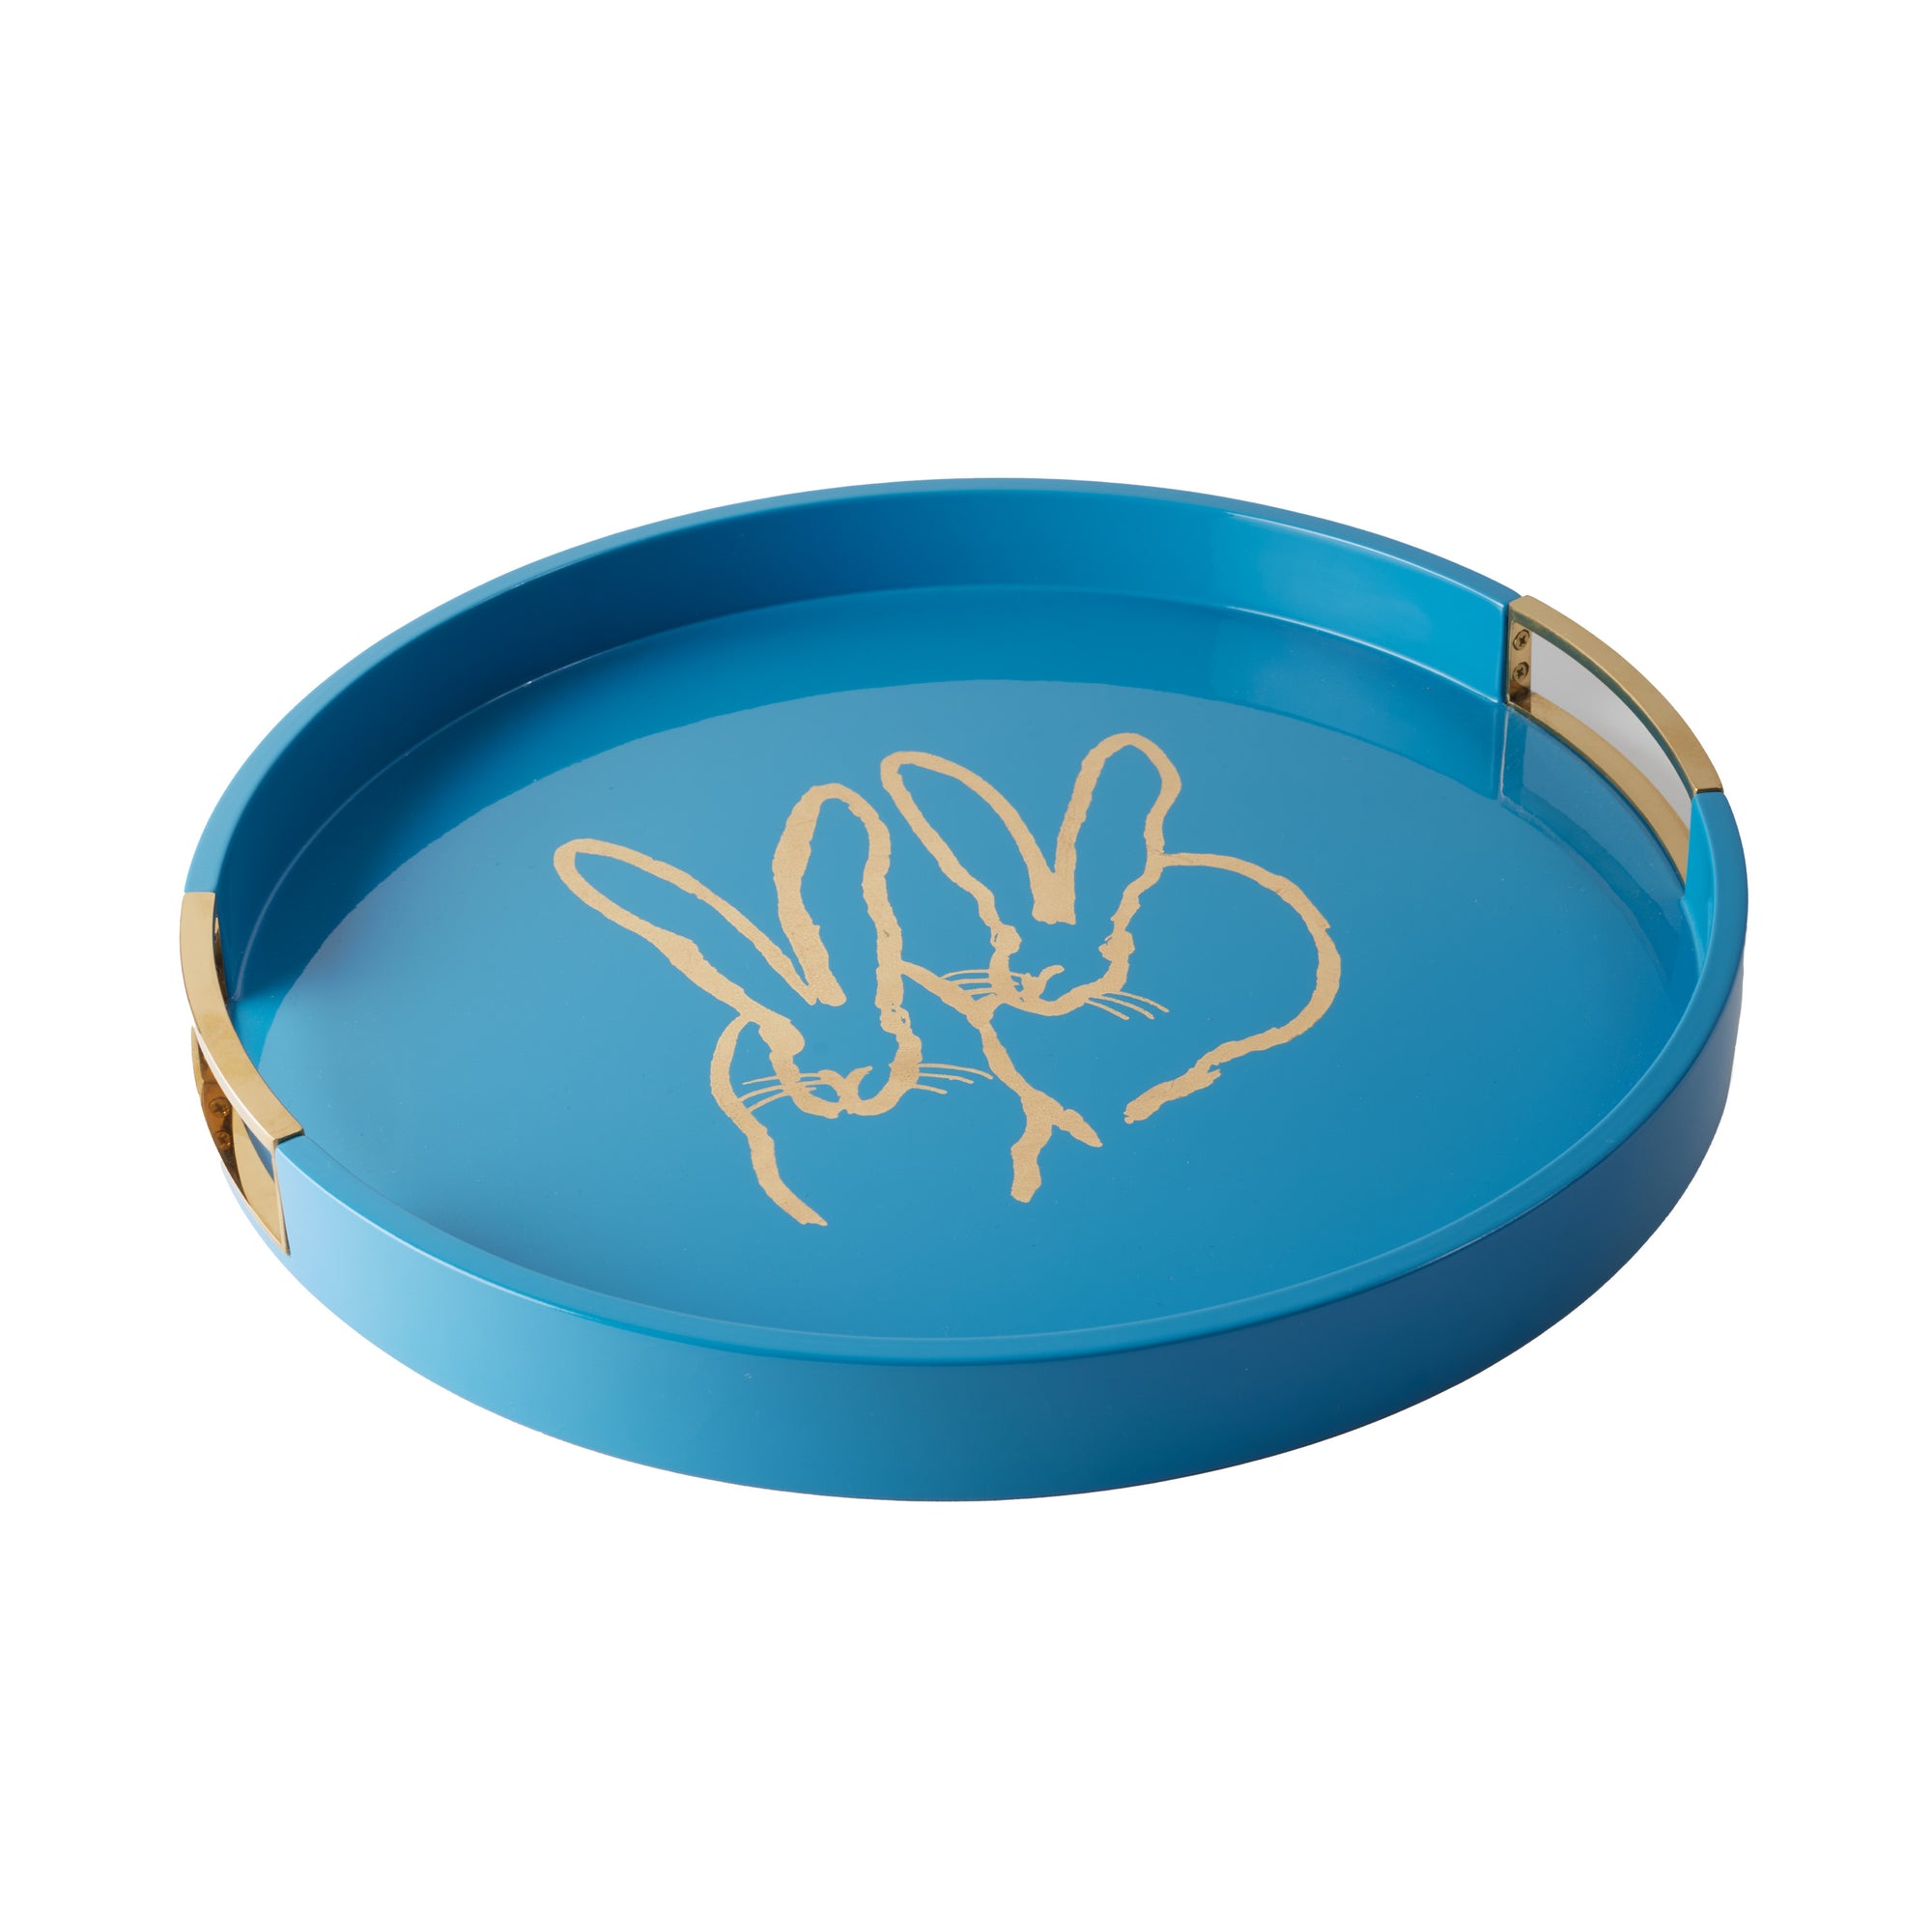 Bunny Drinks Tray, French Blue